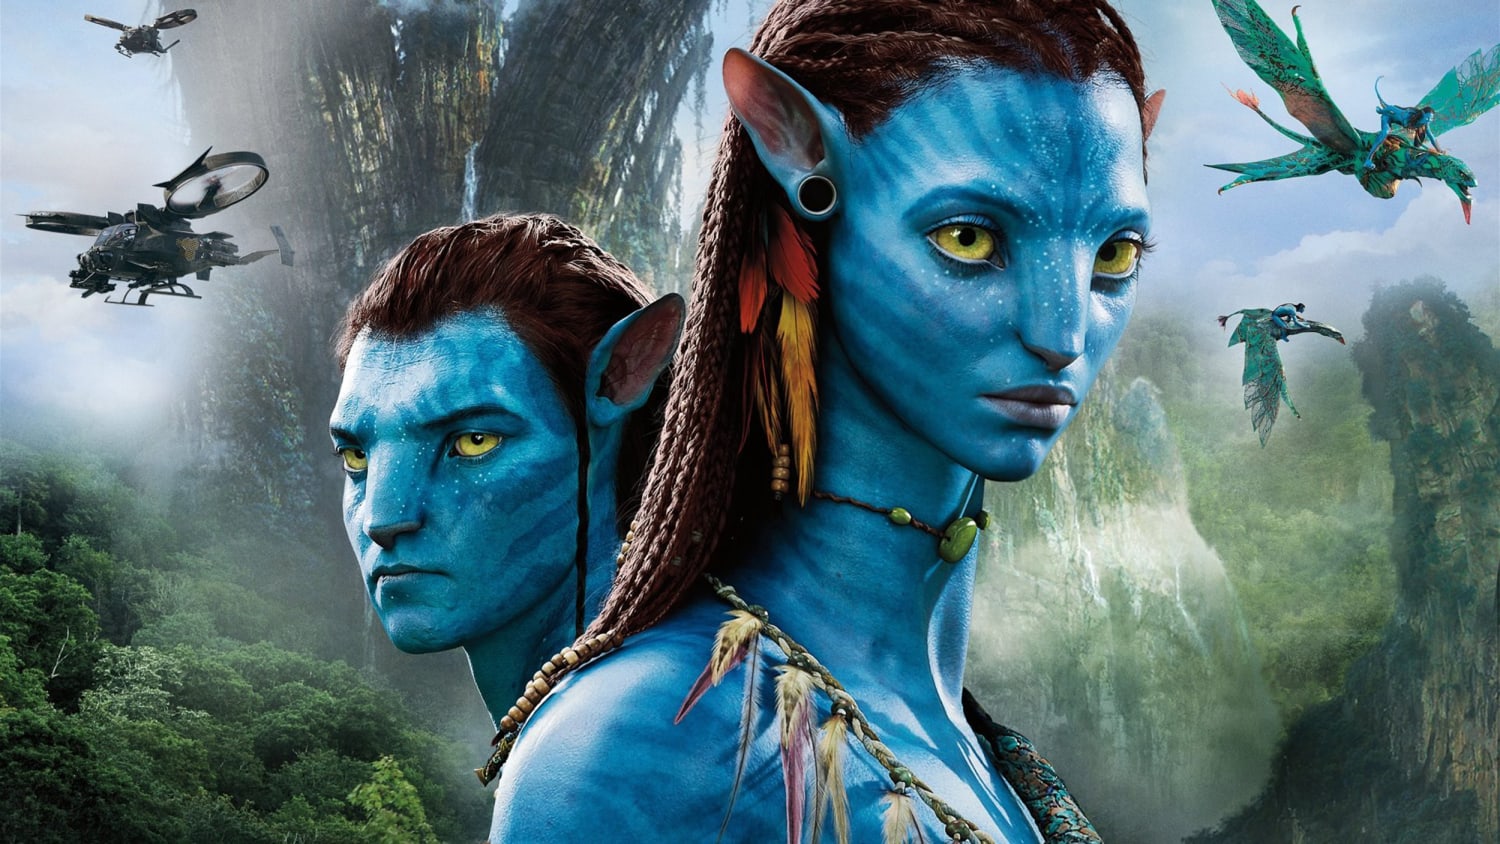 James Cameron says he cut footage including firearms from new Avatar  regrets past use  The Hill